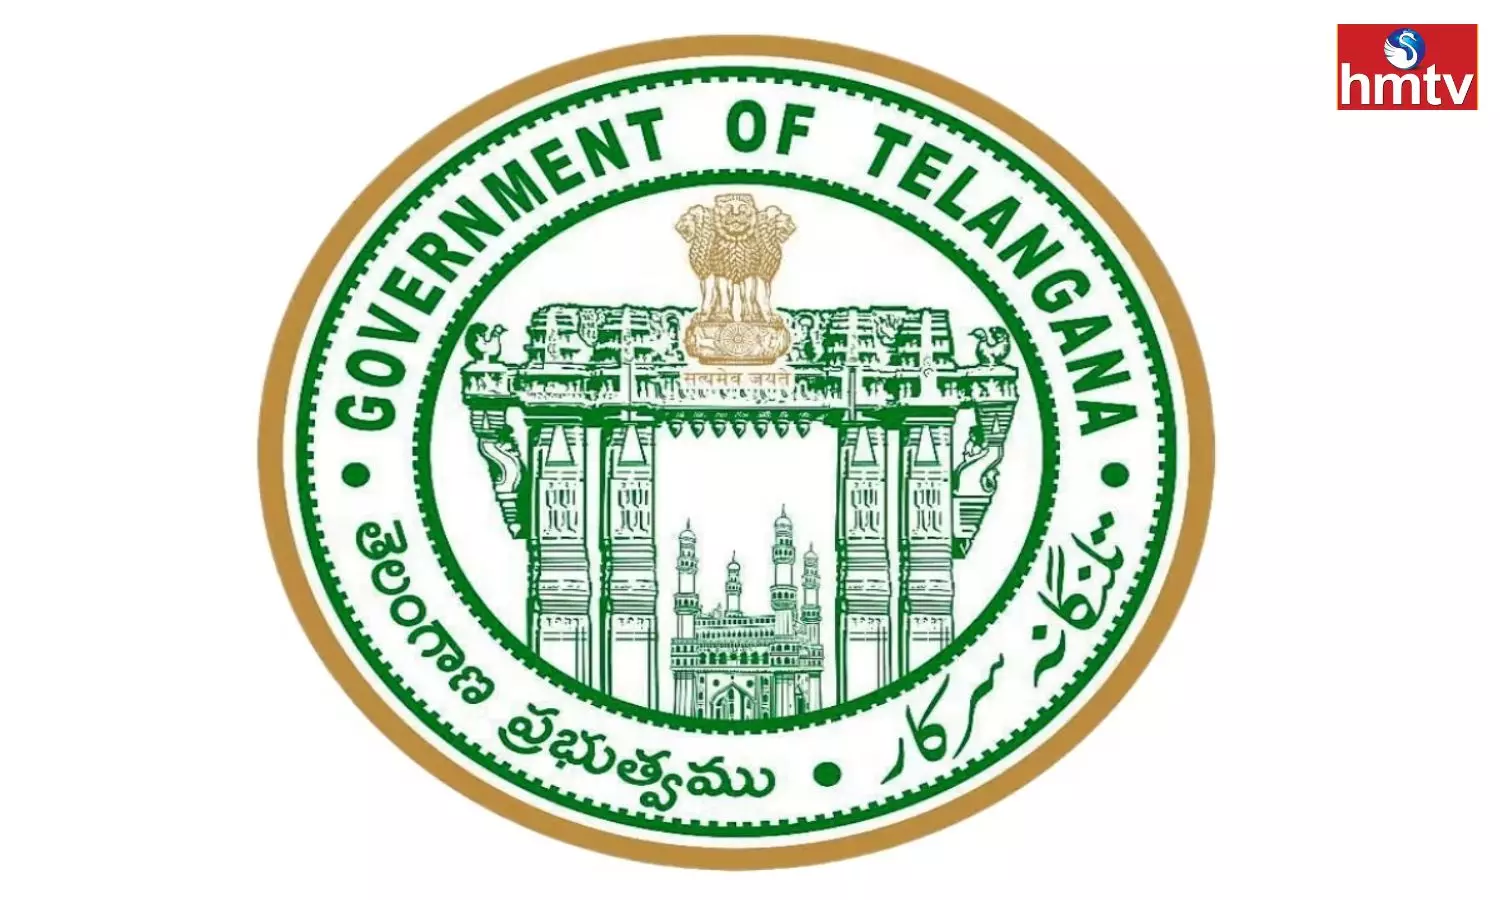 Telangana government invites applications for posts of vice chancellor in 10 State universities